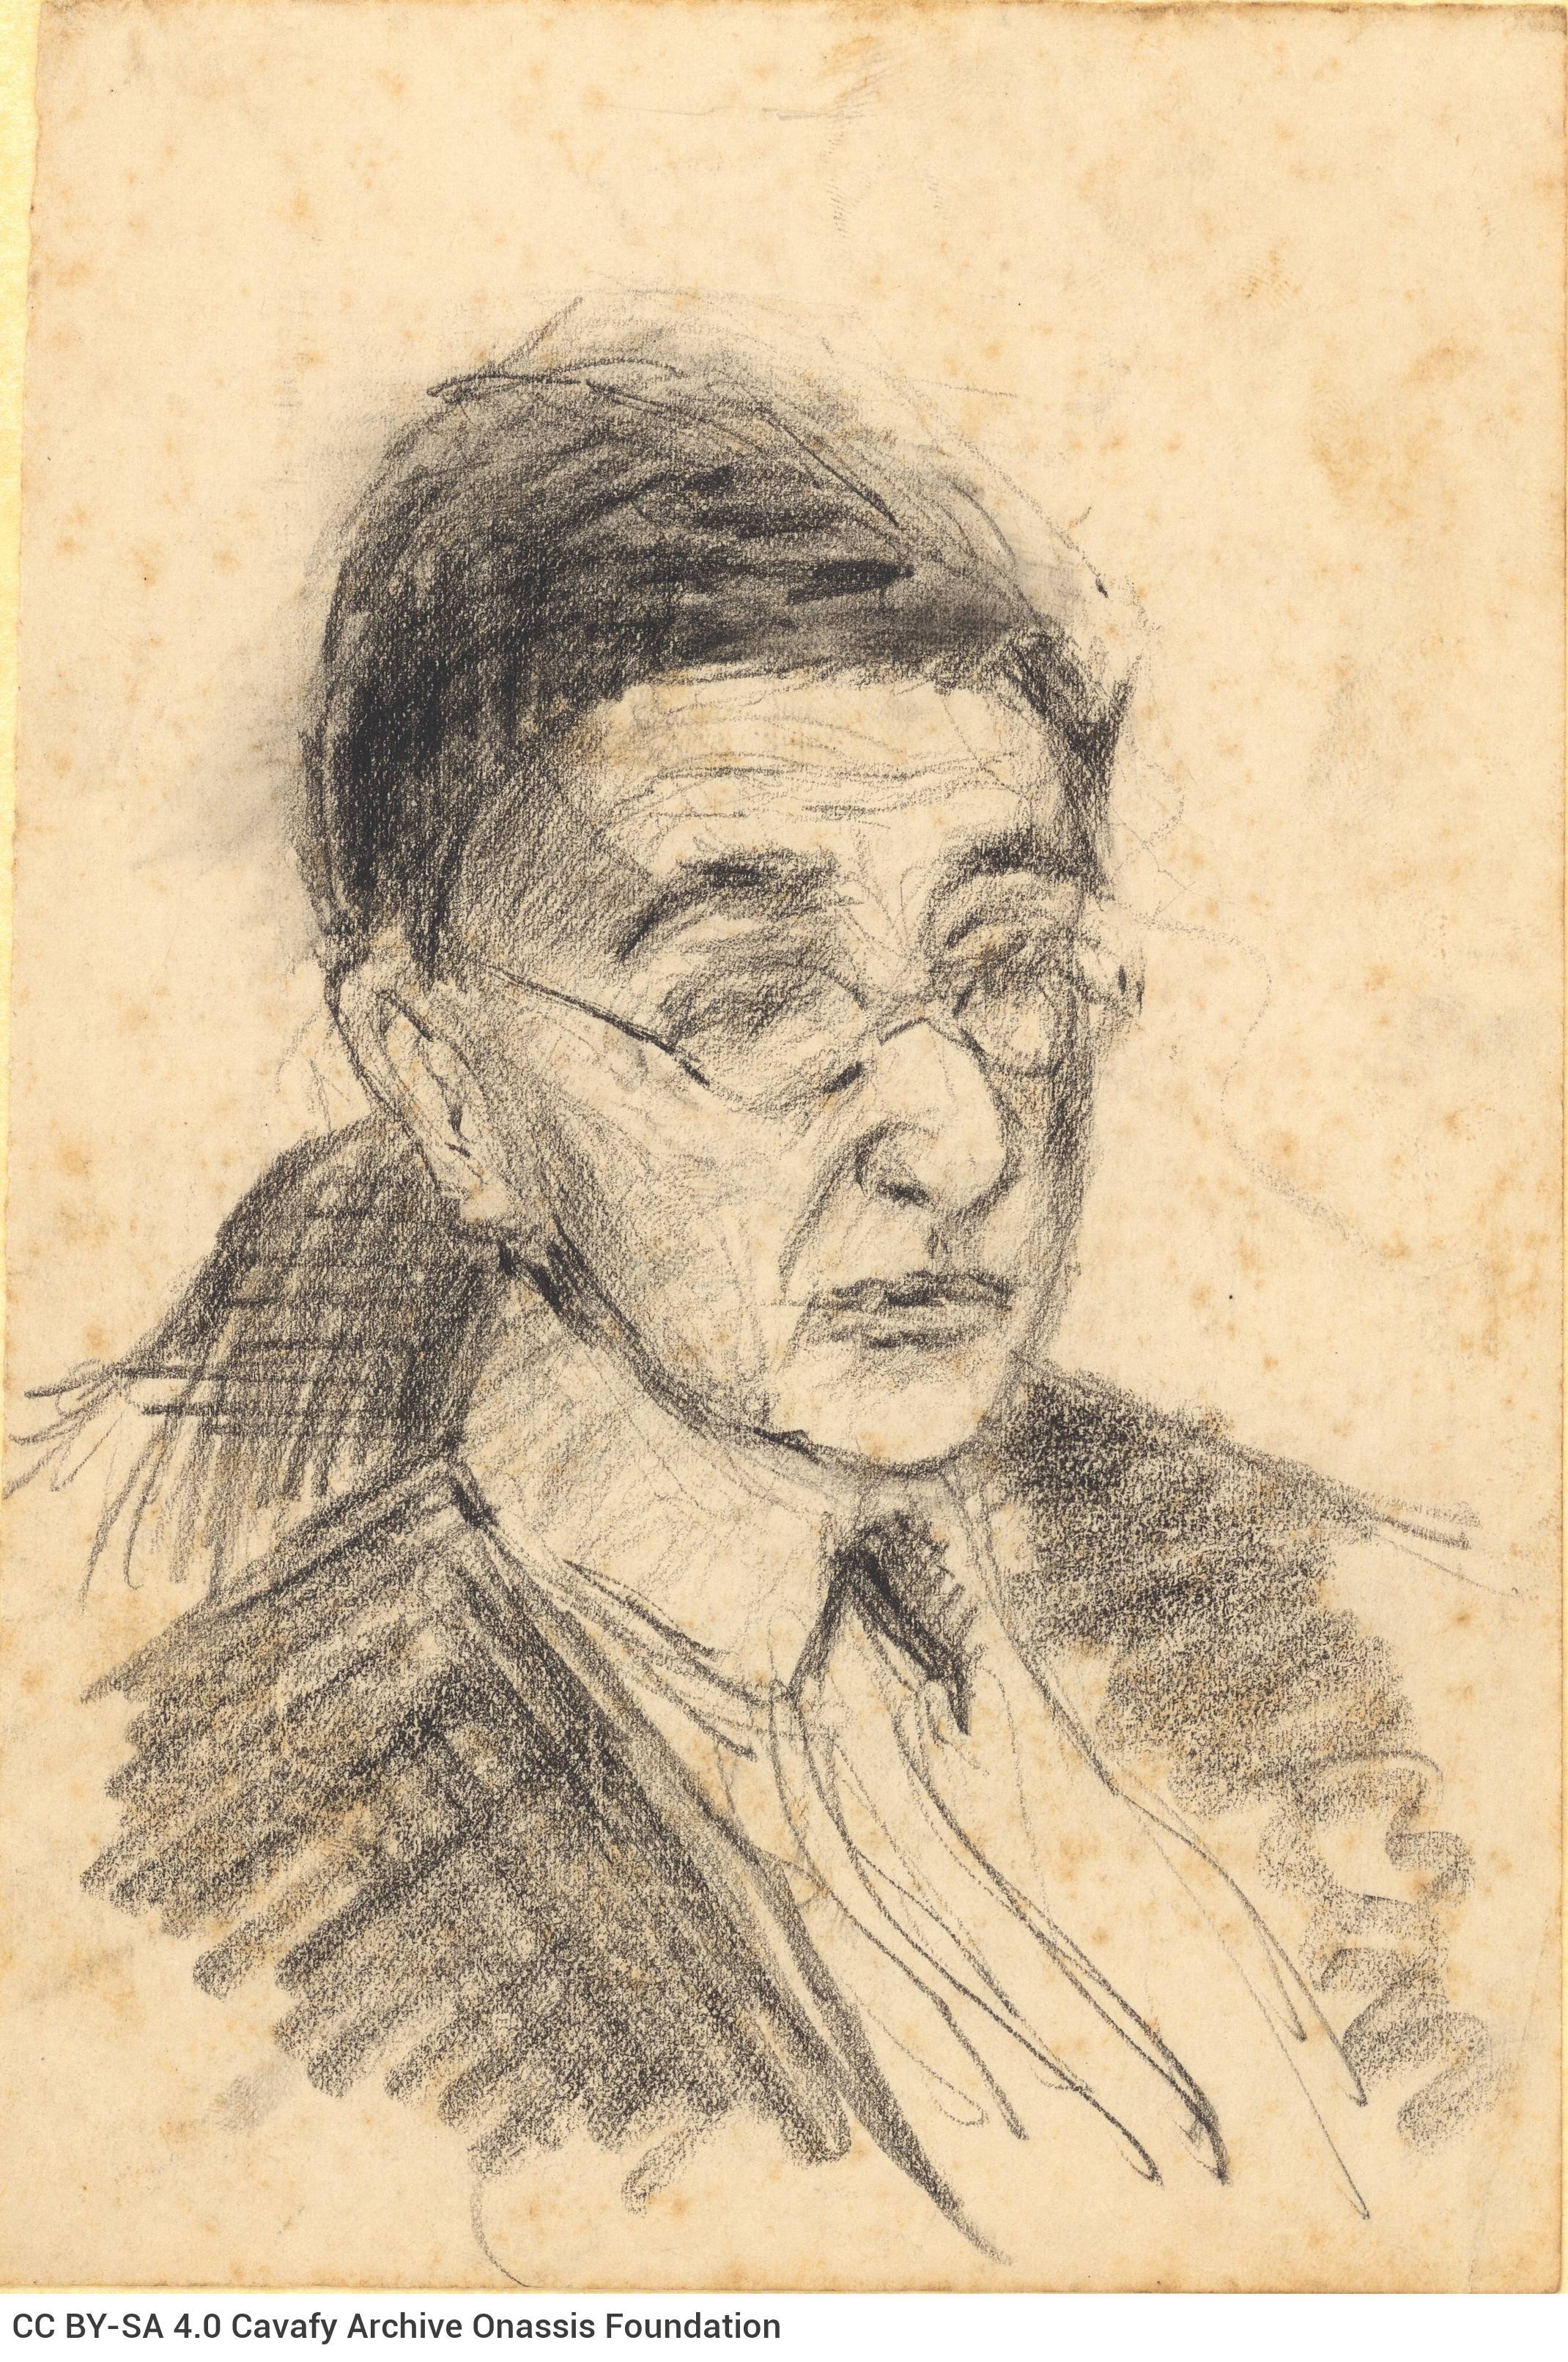 Painting drawing in charcoal. It depicts Cavafy in three-quarter view, wearing glasses, looking slightly to the right. Blank 